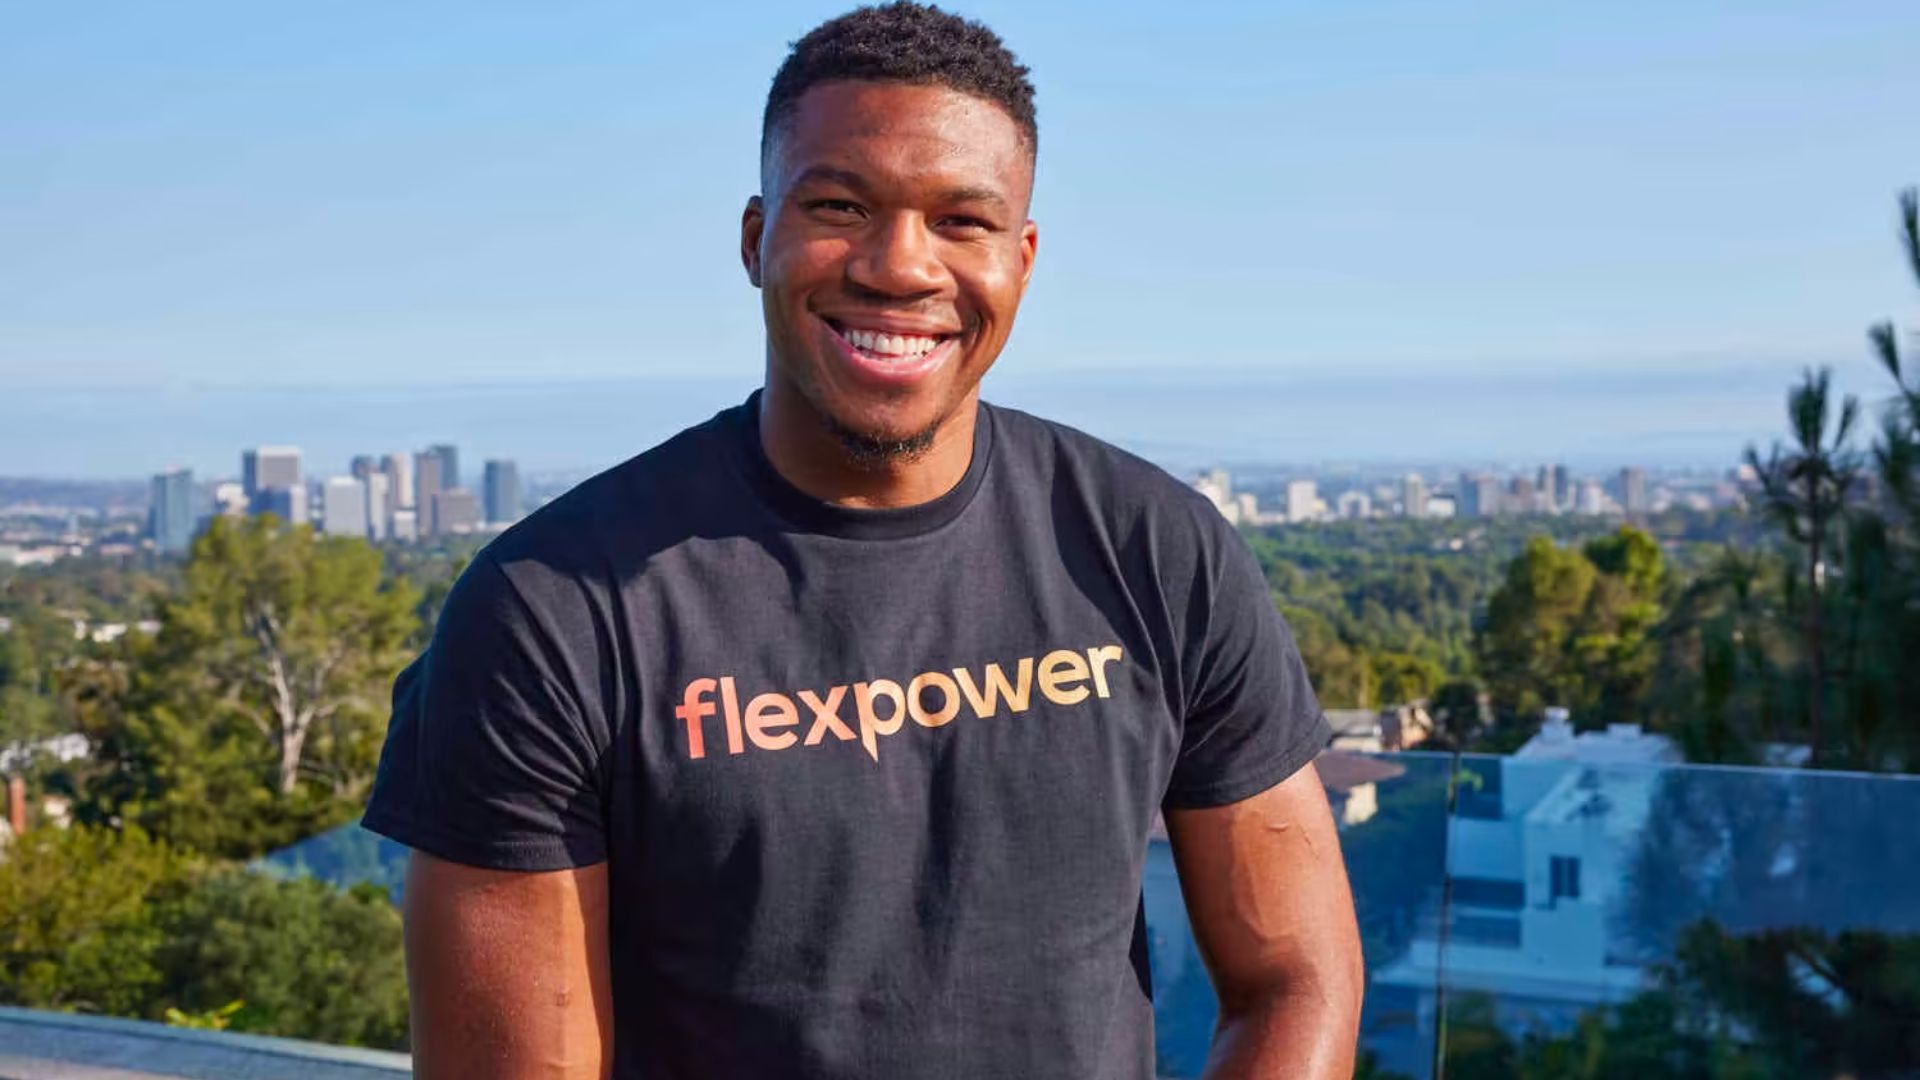 Flexpower Receives Investment from NBA Star Giannis Antetekounmpo